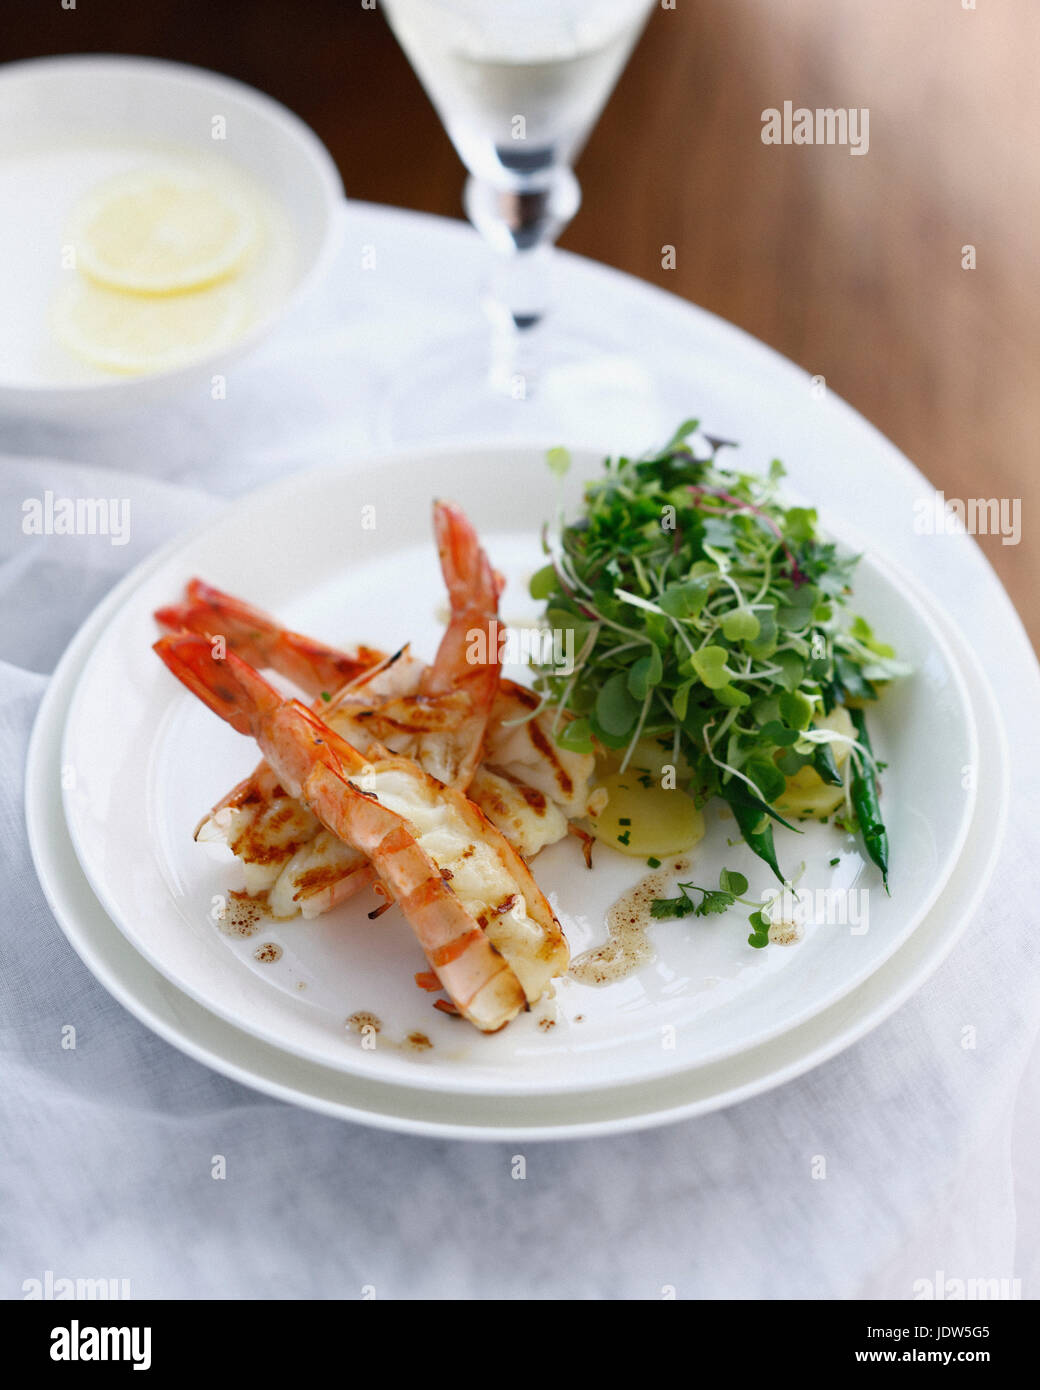 Plate of prawn salad with potatoes and micro herbs Stock Photo